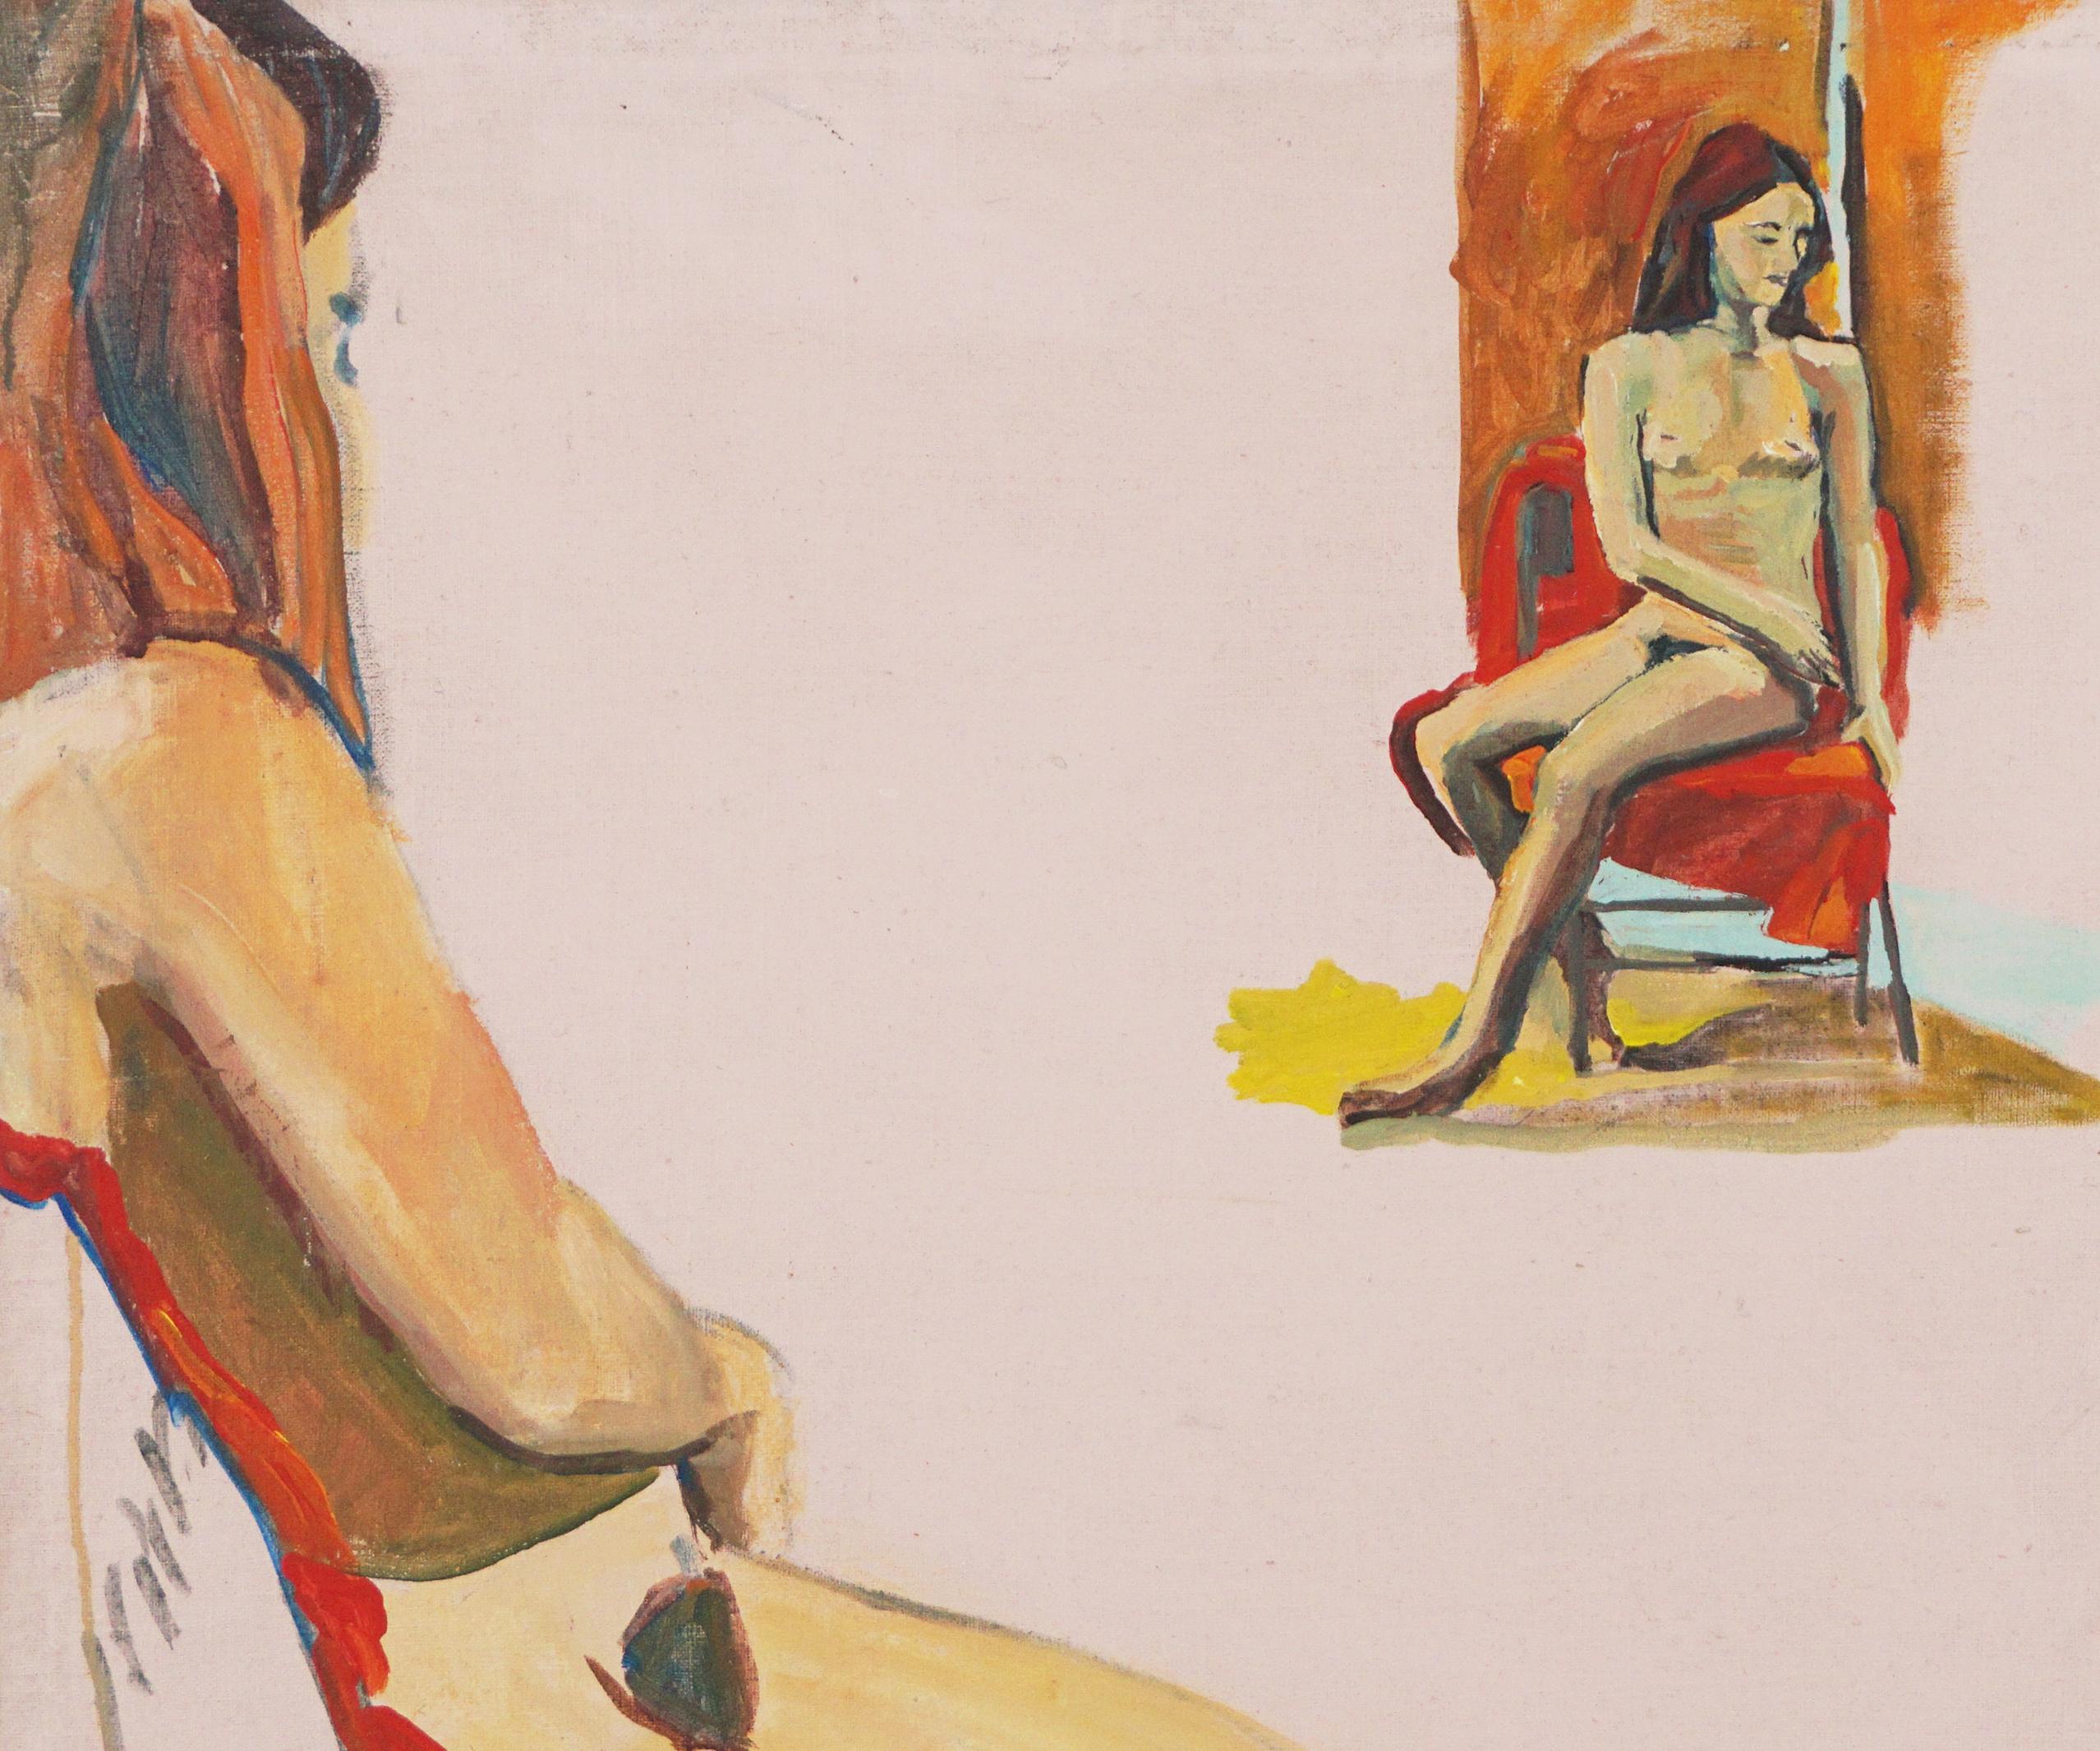 Modern Nude Study of Red Haired Woman Seated in Chair - American Modern Painting by Patricia Gren Hayes